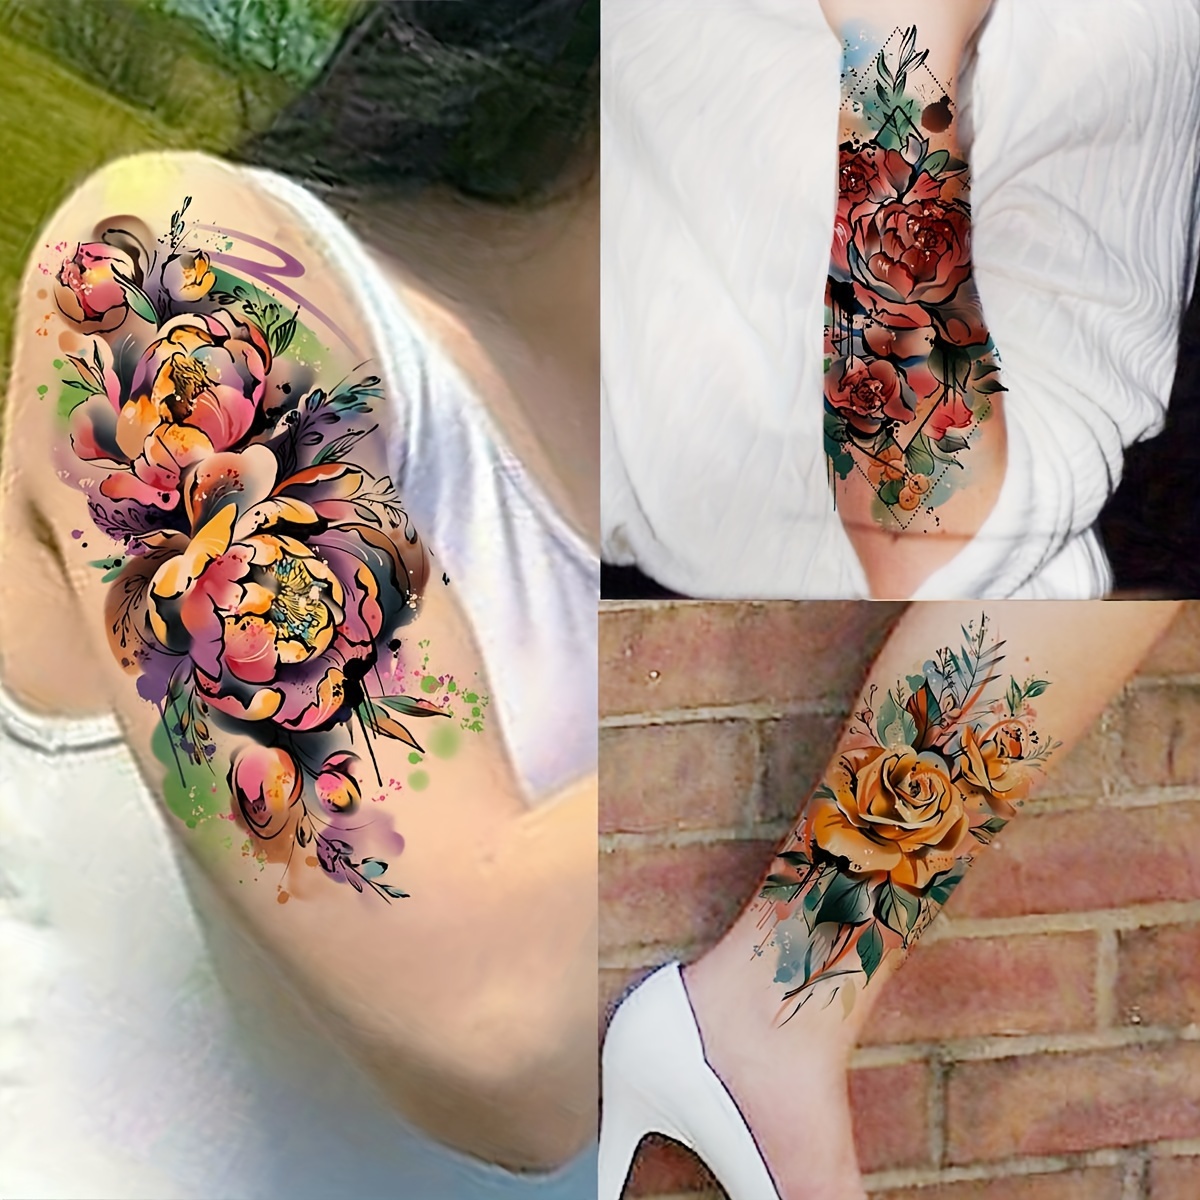 Buy Wholesale cool leg sleeve tattoos For Temporary Tattoos And